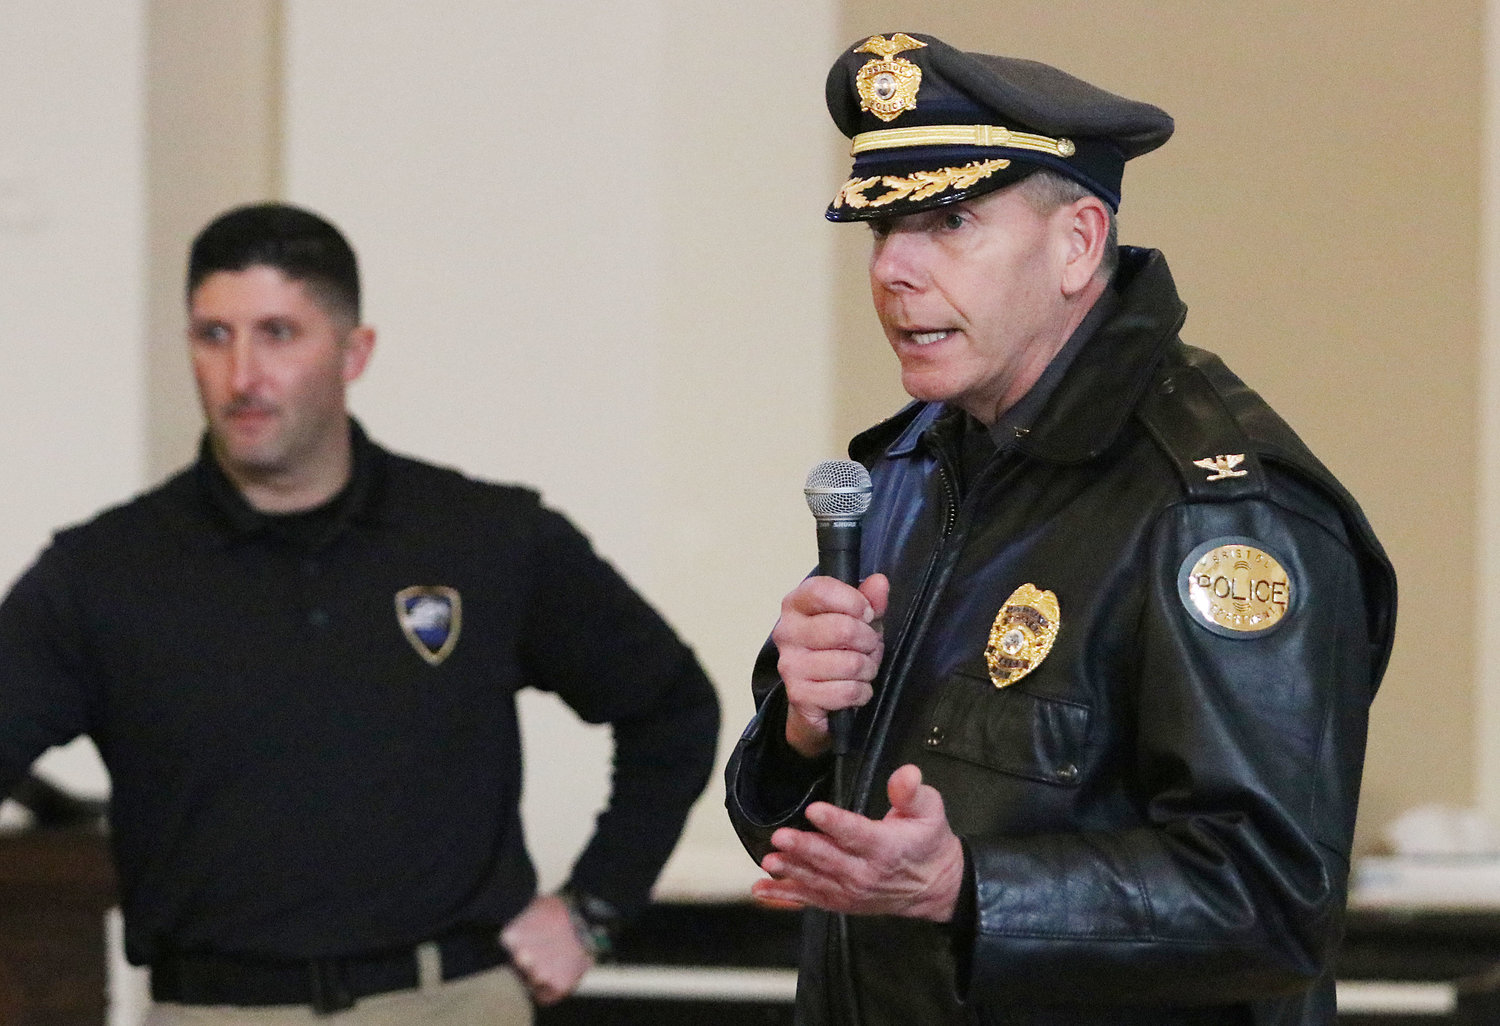 Chief of Police Kevin Lynch talks to the school employees.